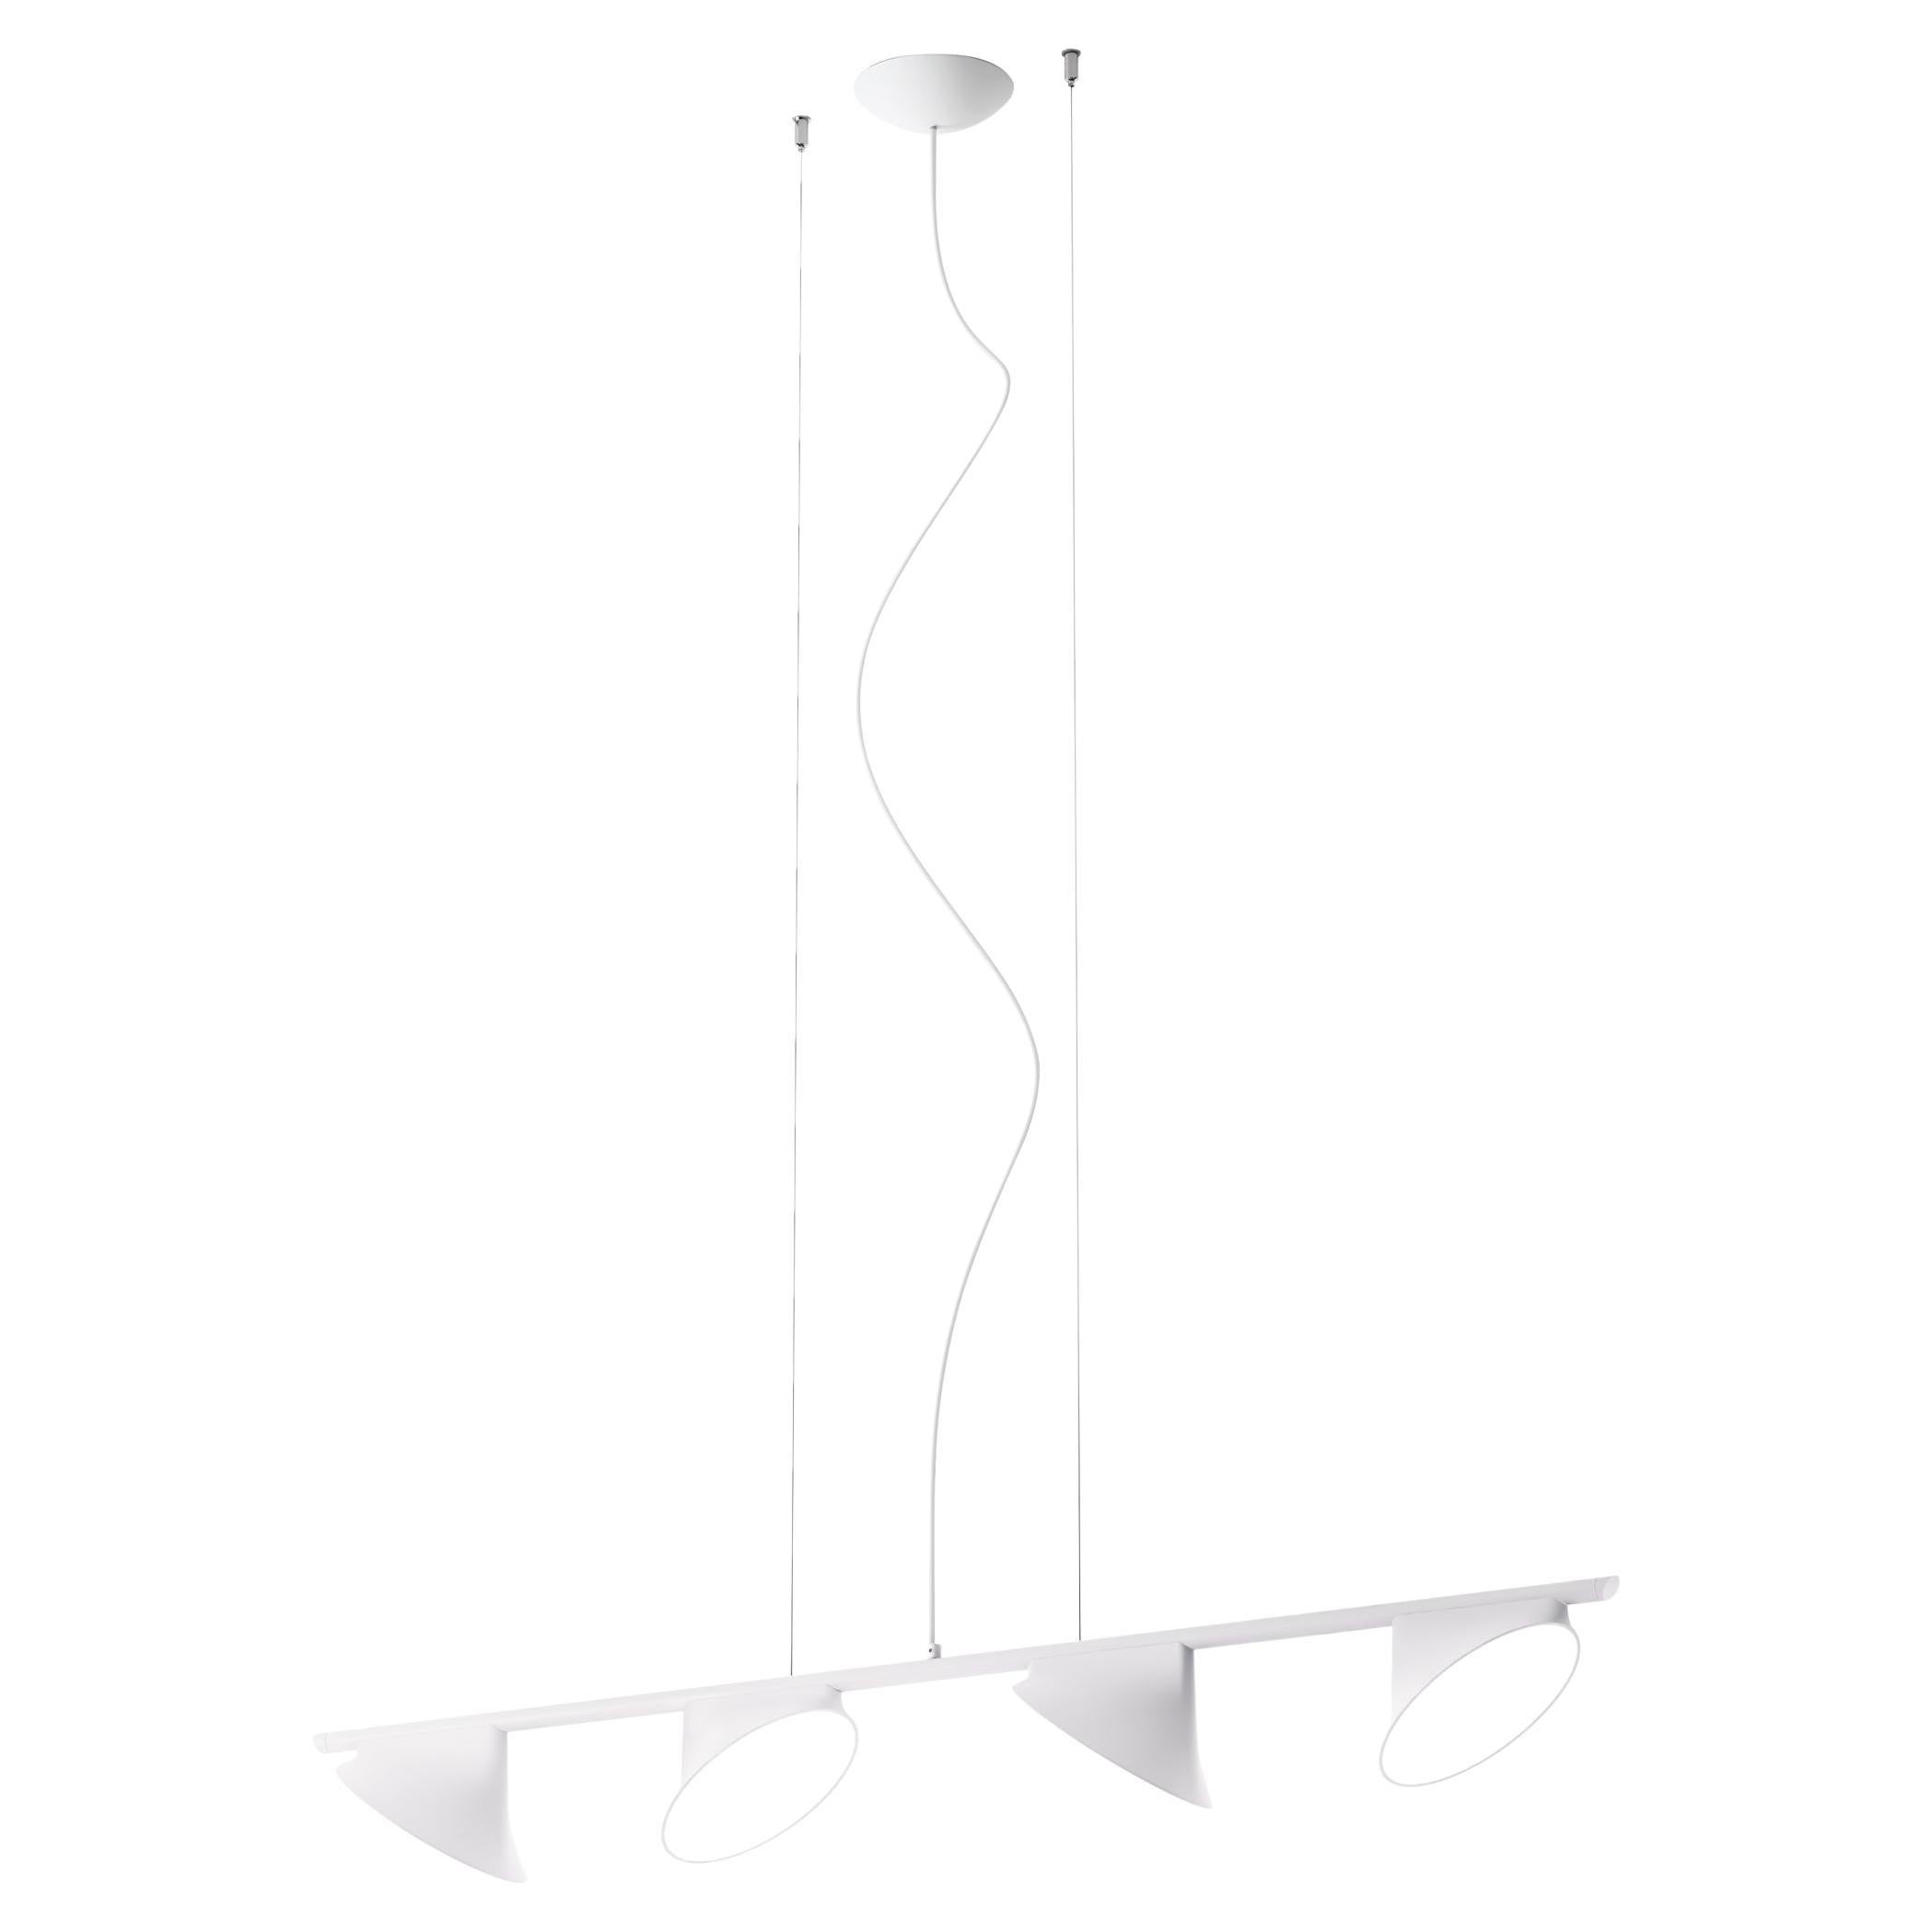 Axolight Orchid 4 Light Pendant Lamp with Aluminum Body in White byRainer Mutsch For Sale